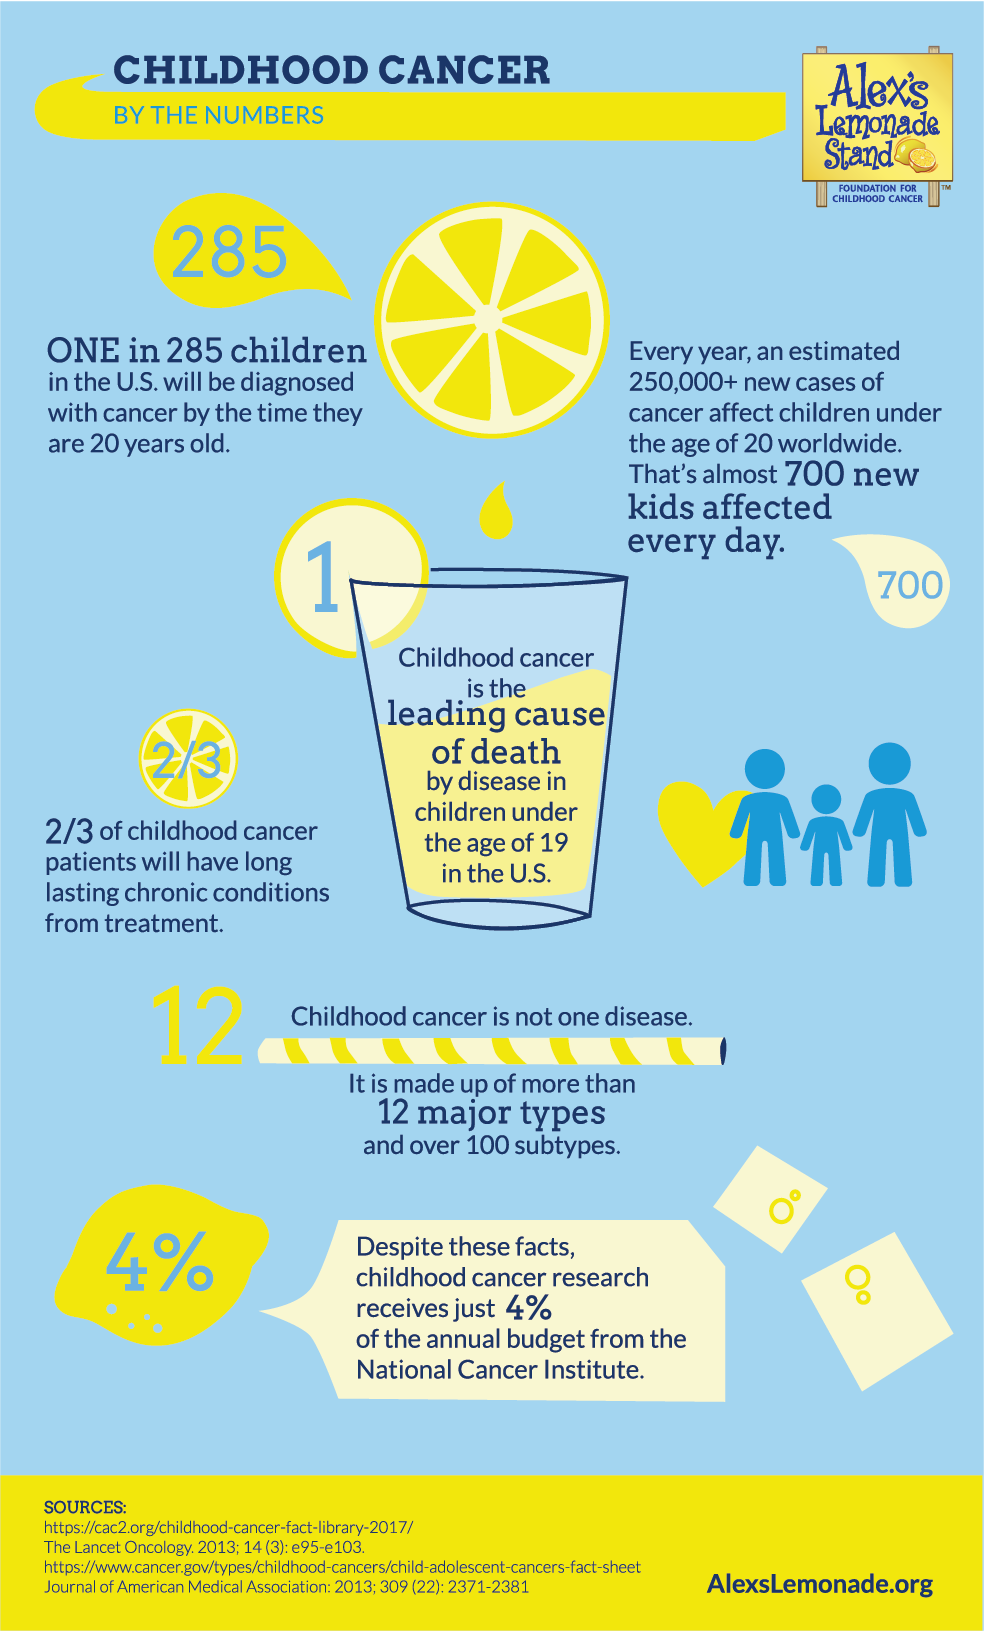 Childhood Cancer Facts By the Numbers Alex's Lemonade